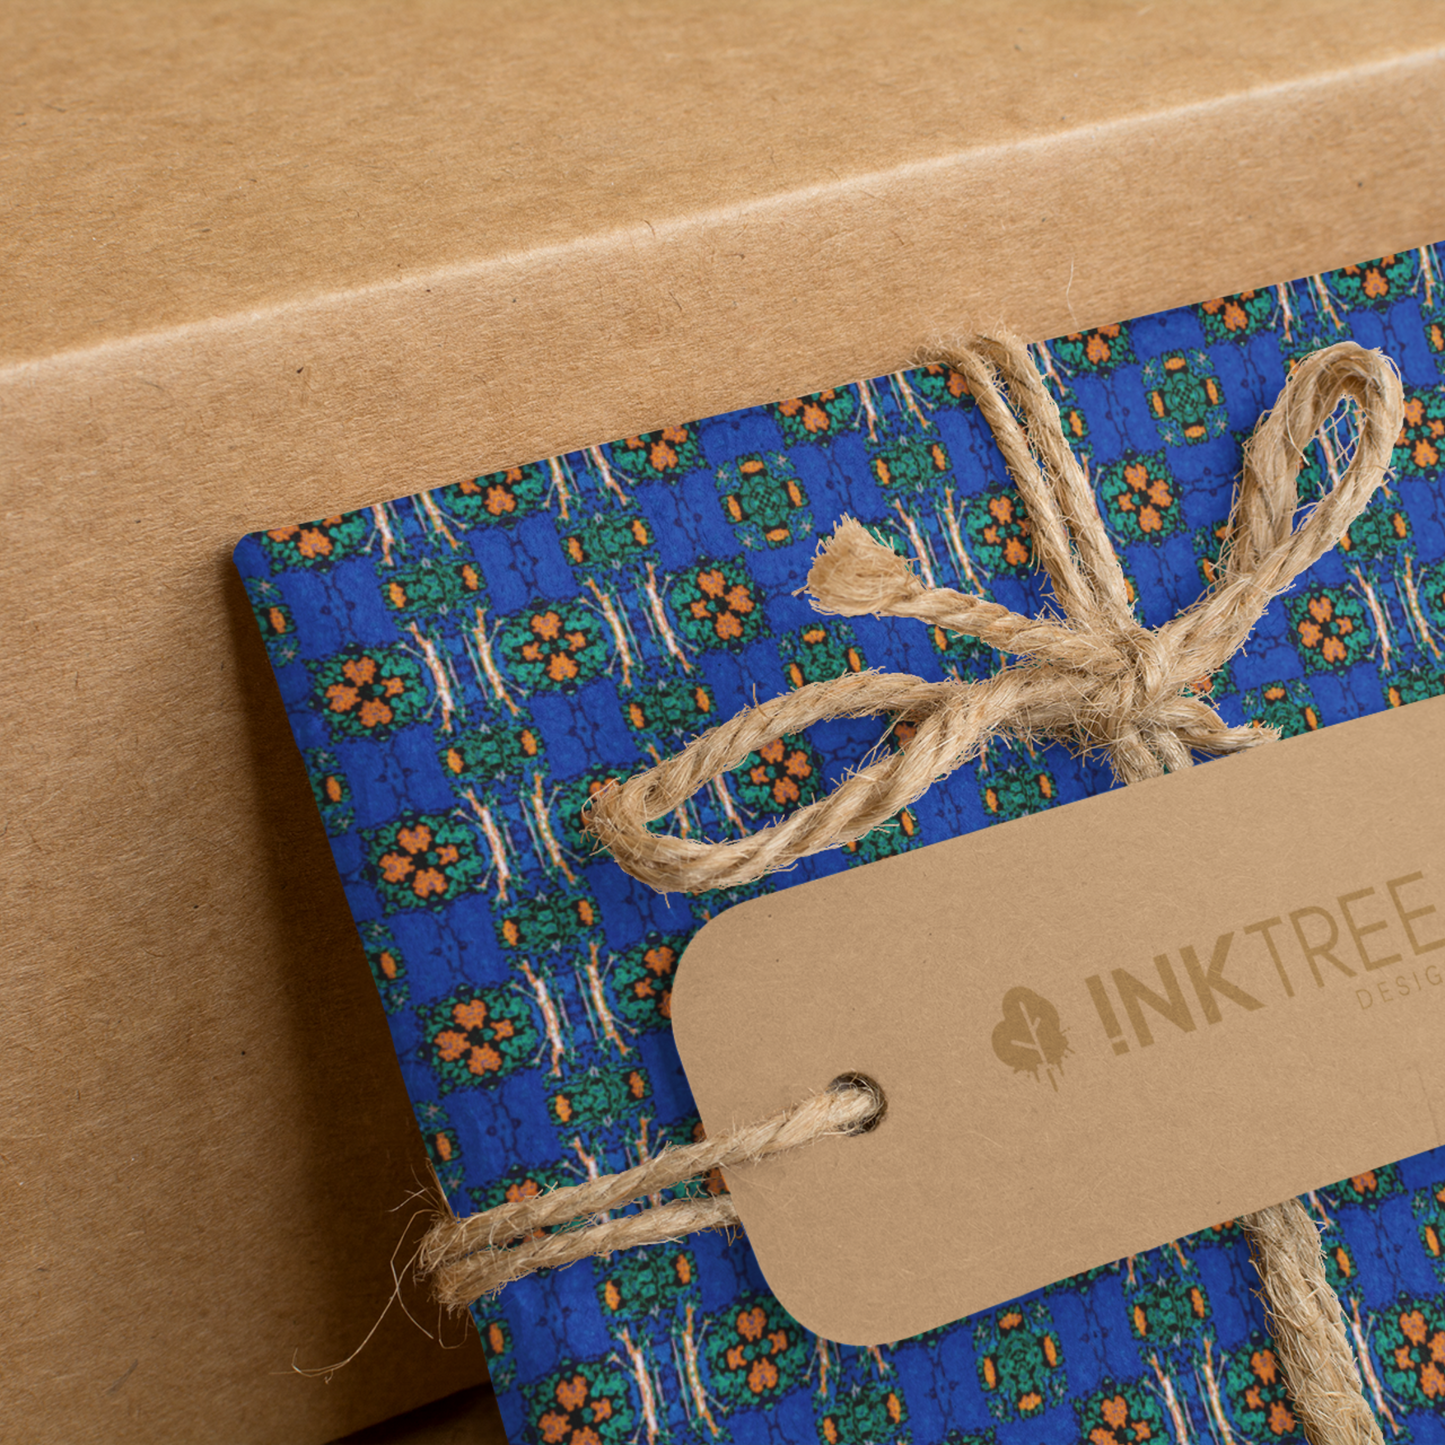 A present wrapped with an orange, white, black, blue and green floral pattern, tied with brown string with a brown paper tag with ink tree design logo on it, leaning on a brown paper background.